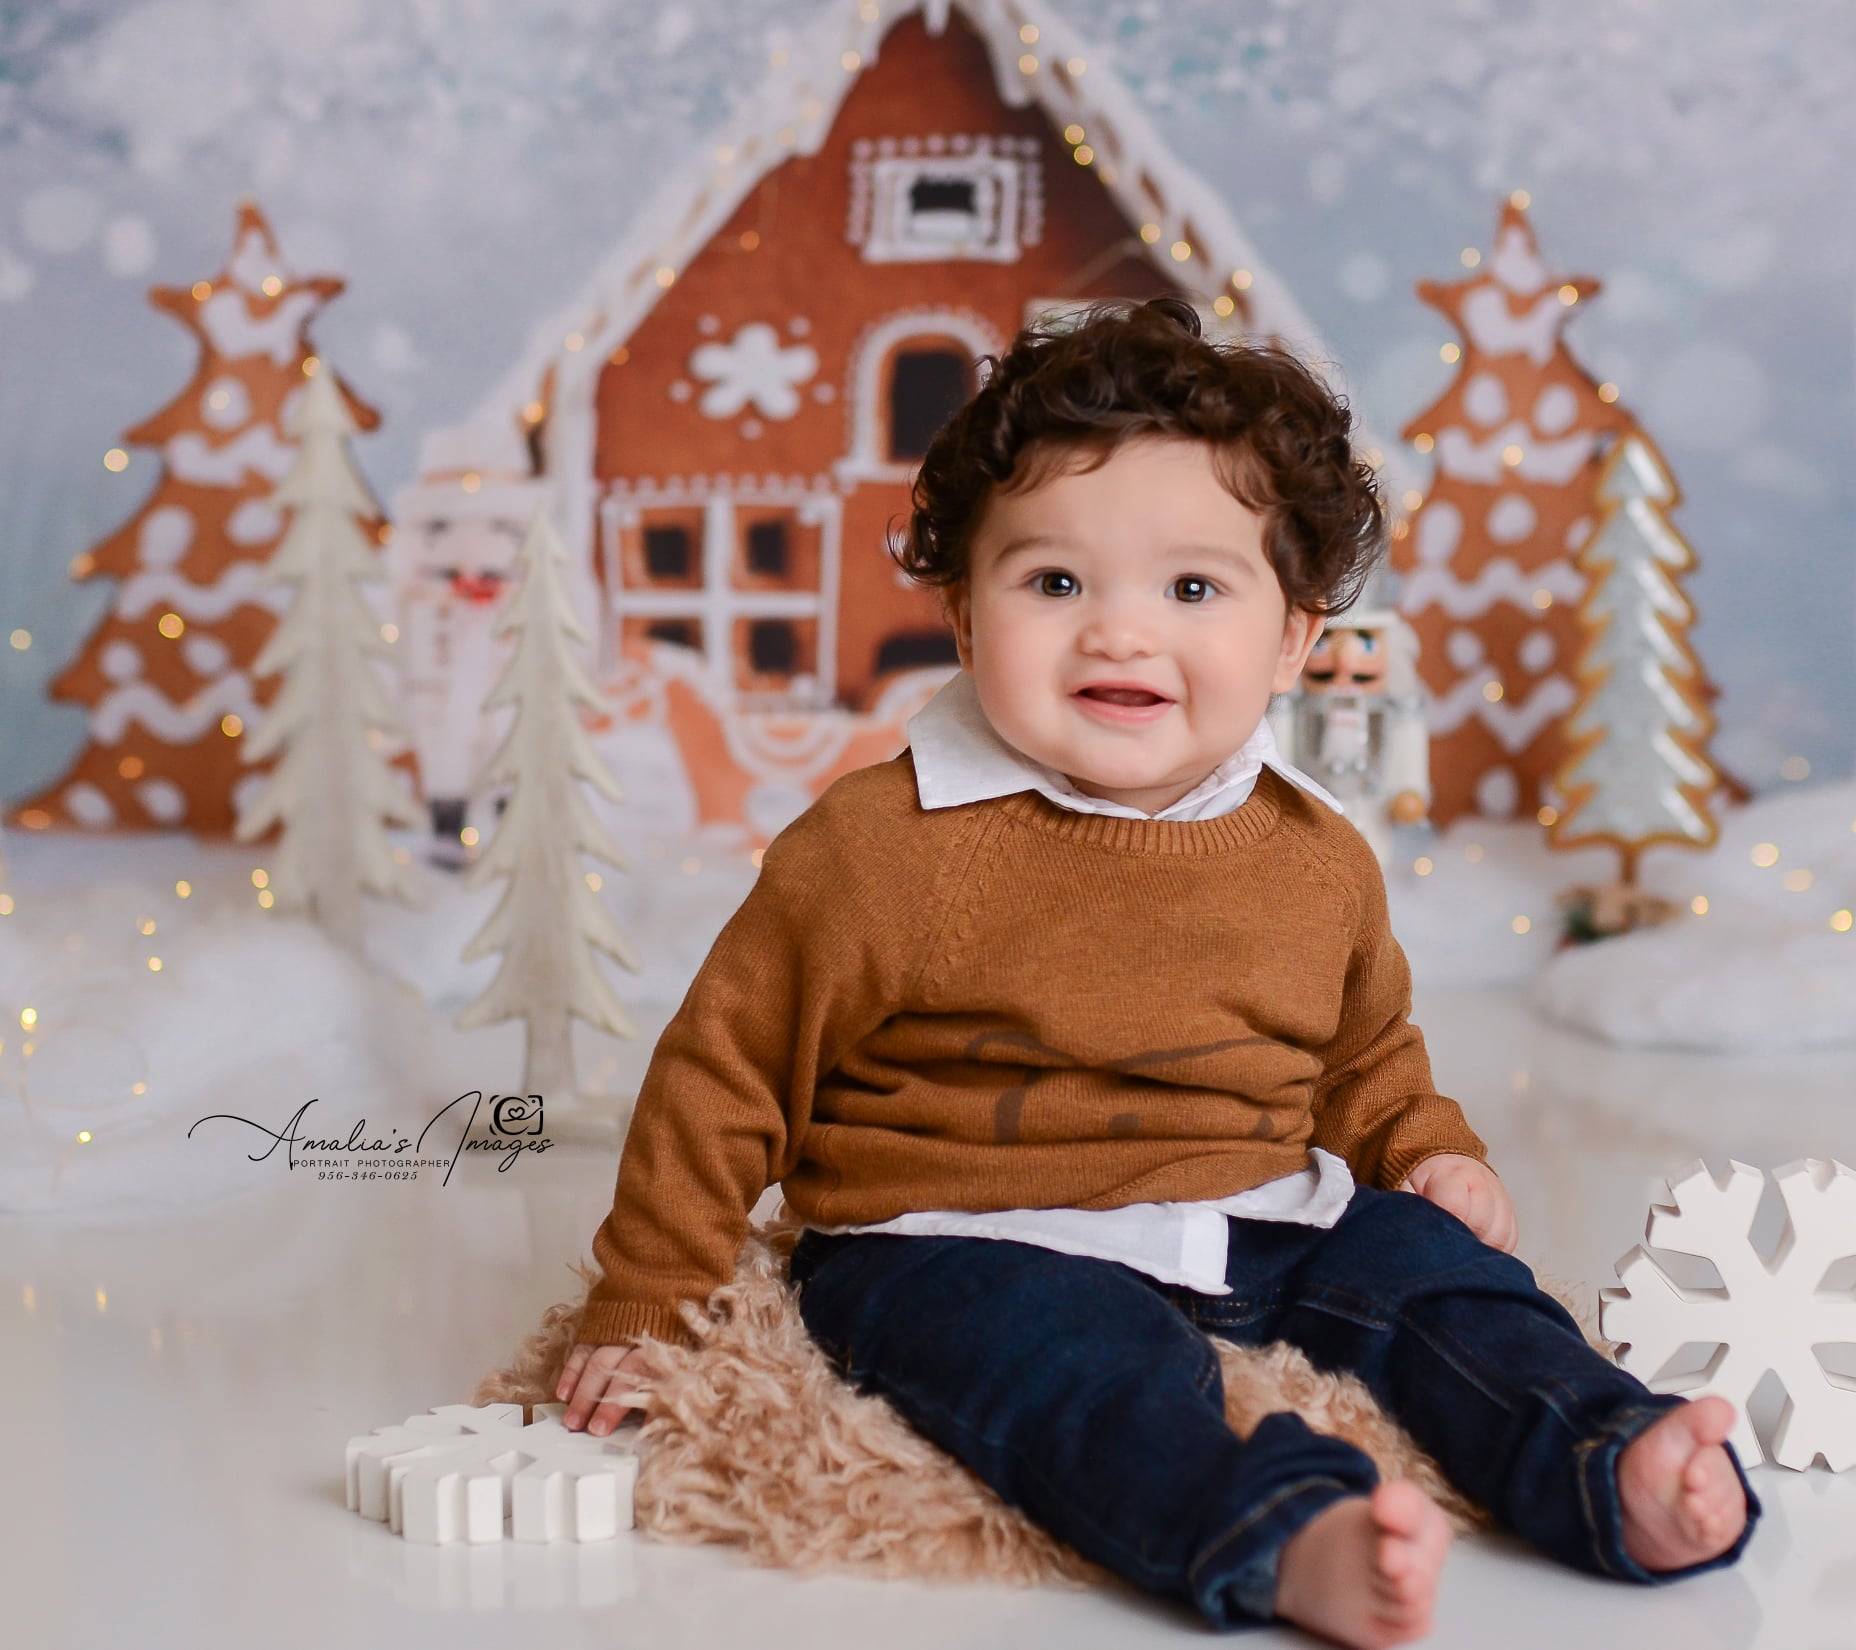 Kate Christmas Gingerbread House Hot Cocoa Backdrop for Photography